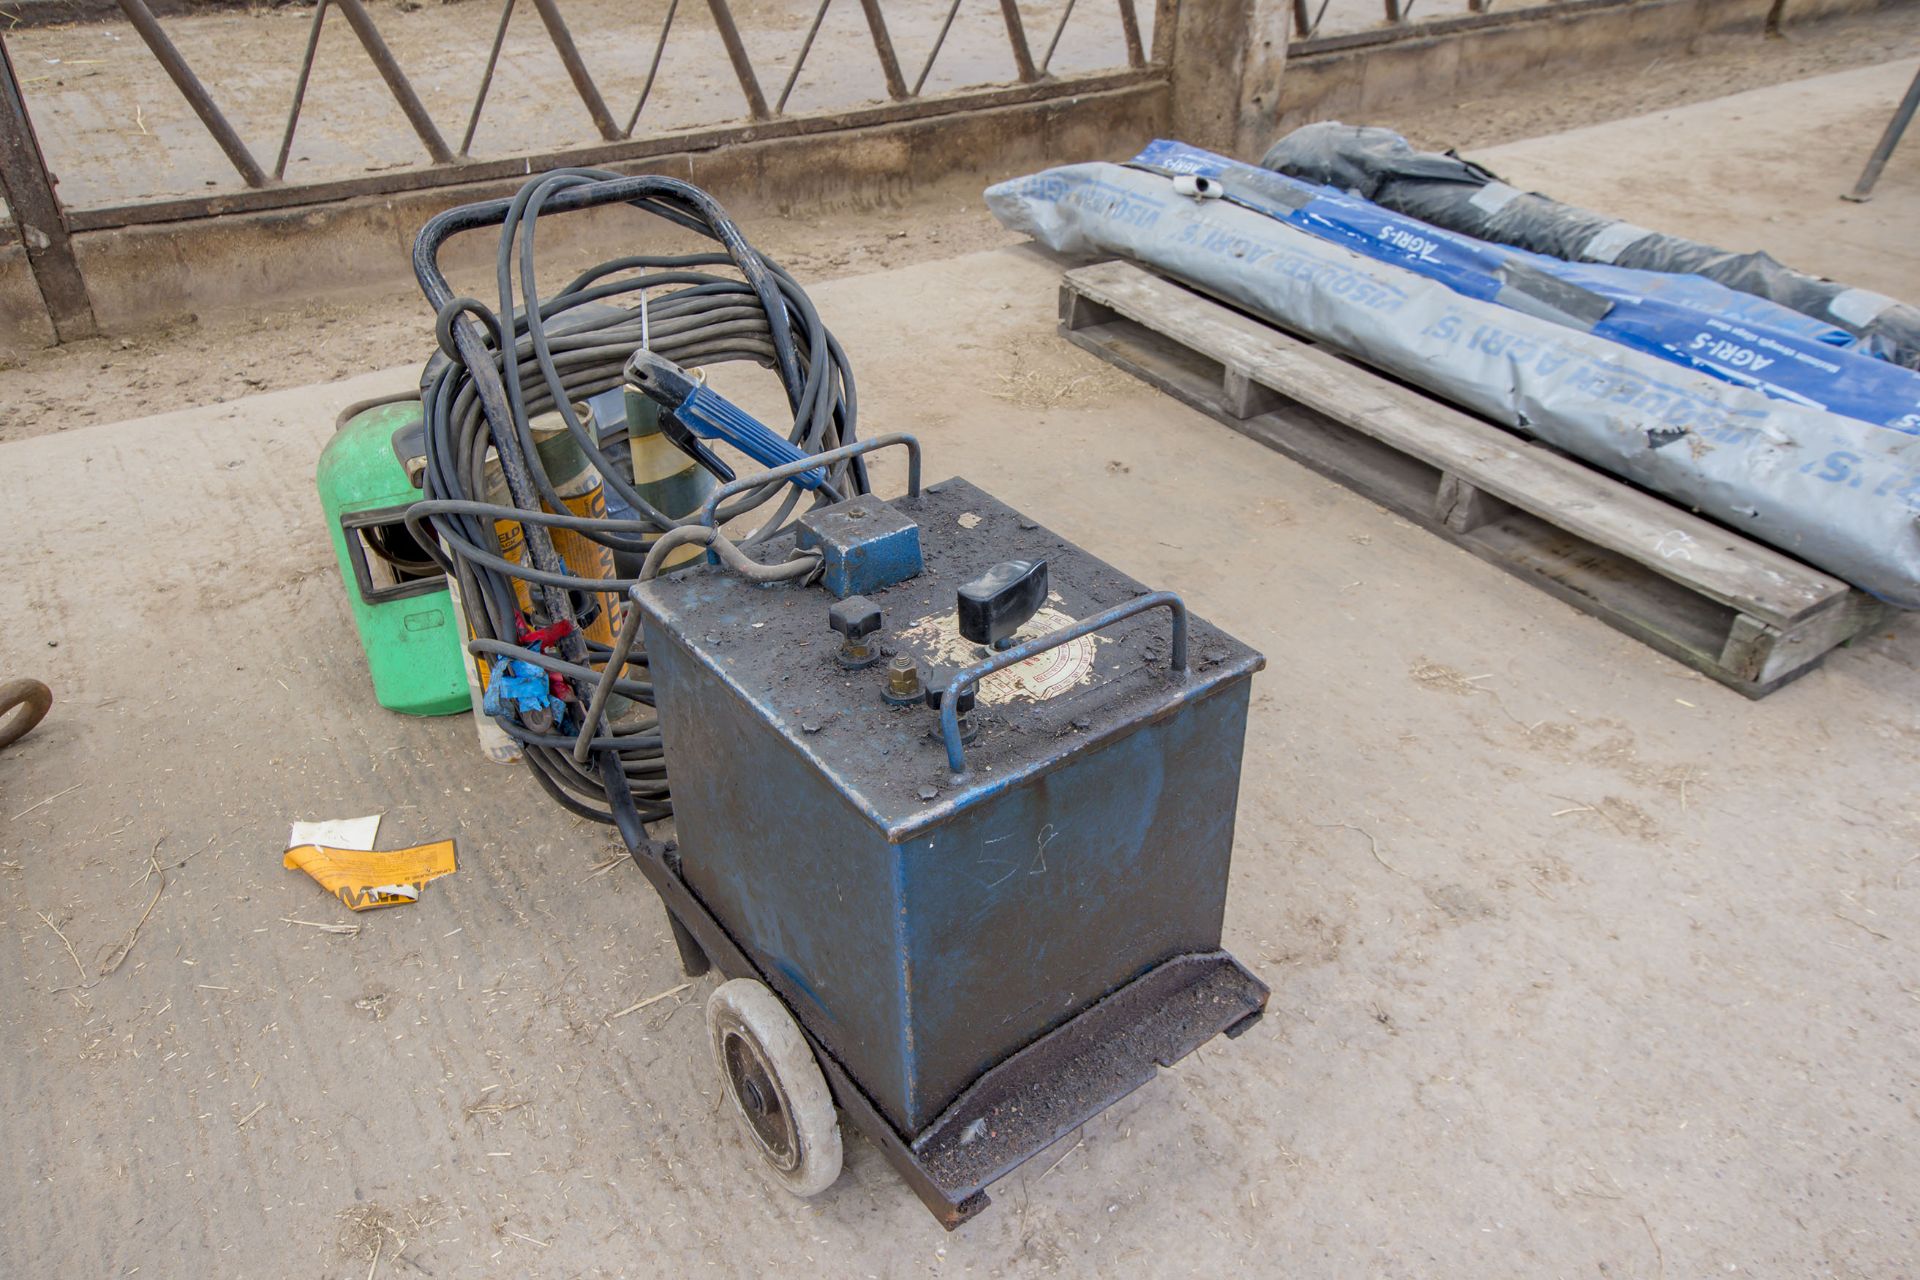 Mobile ARC electric welder, rods and masks.